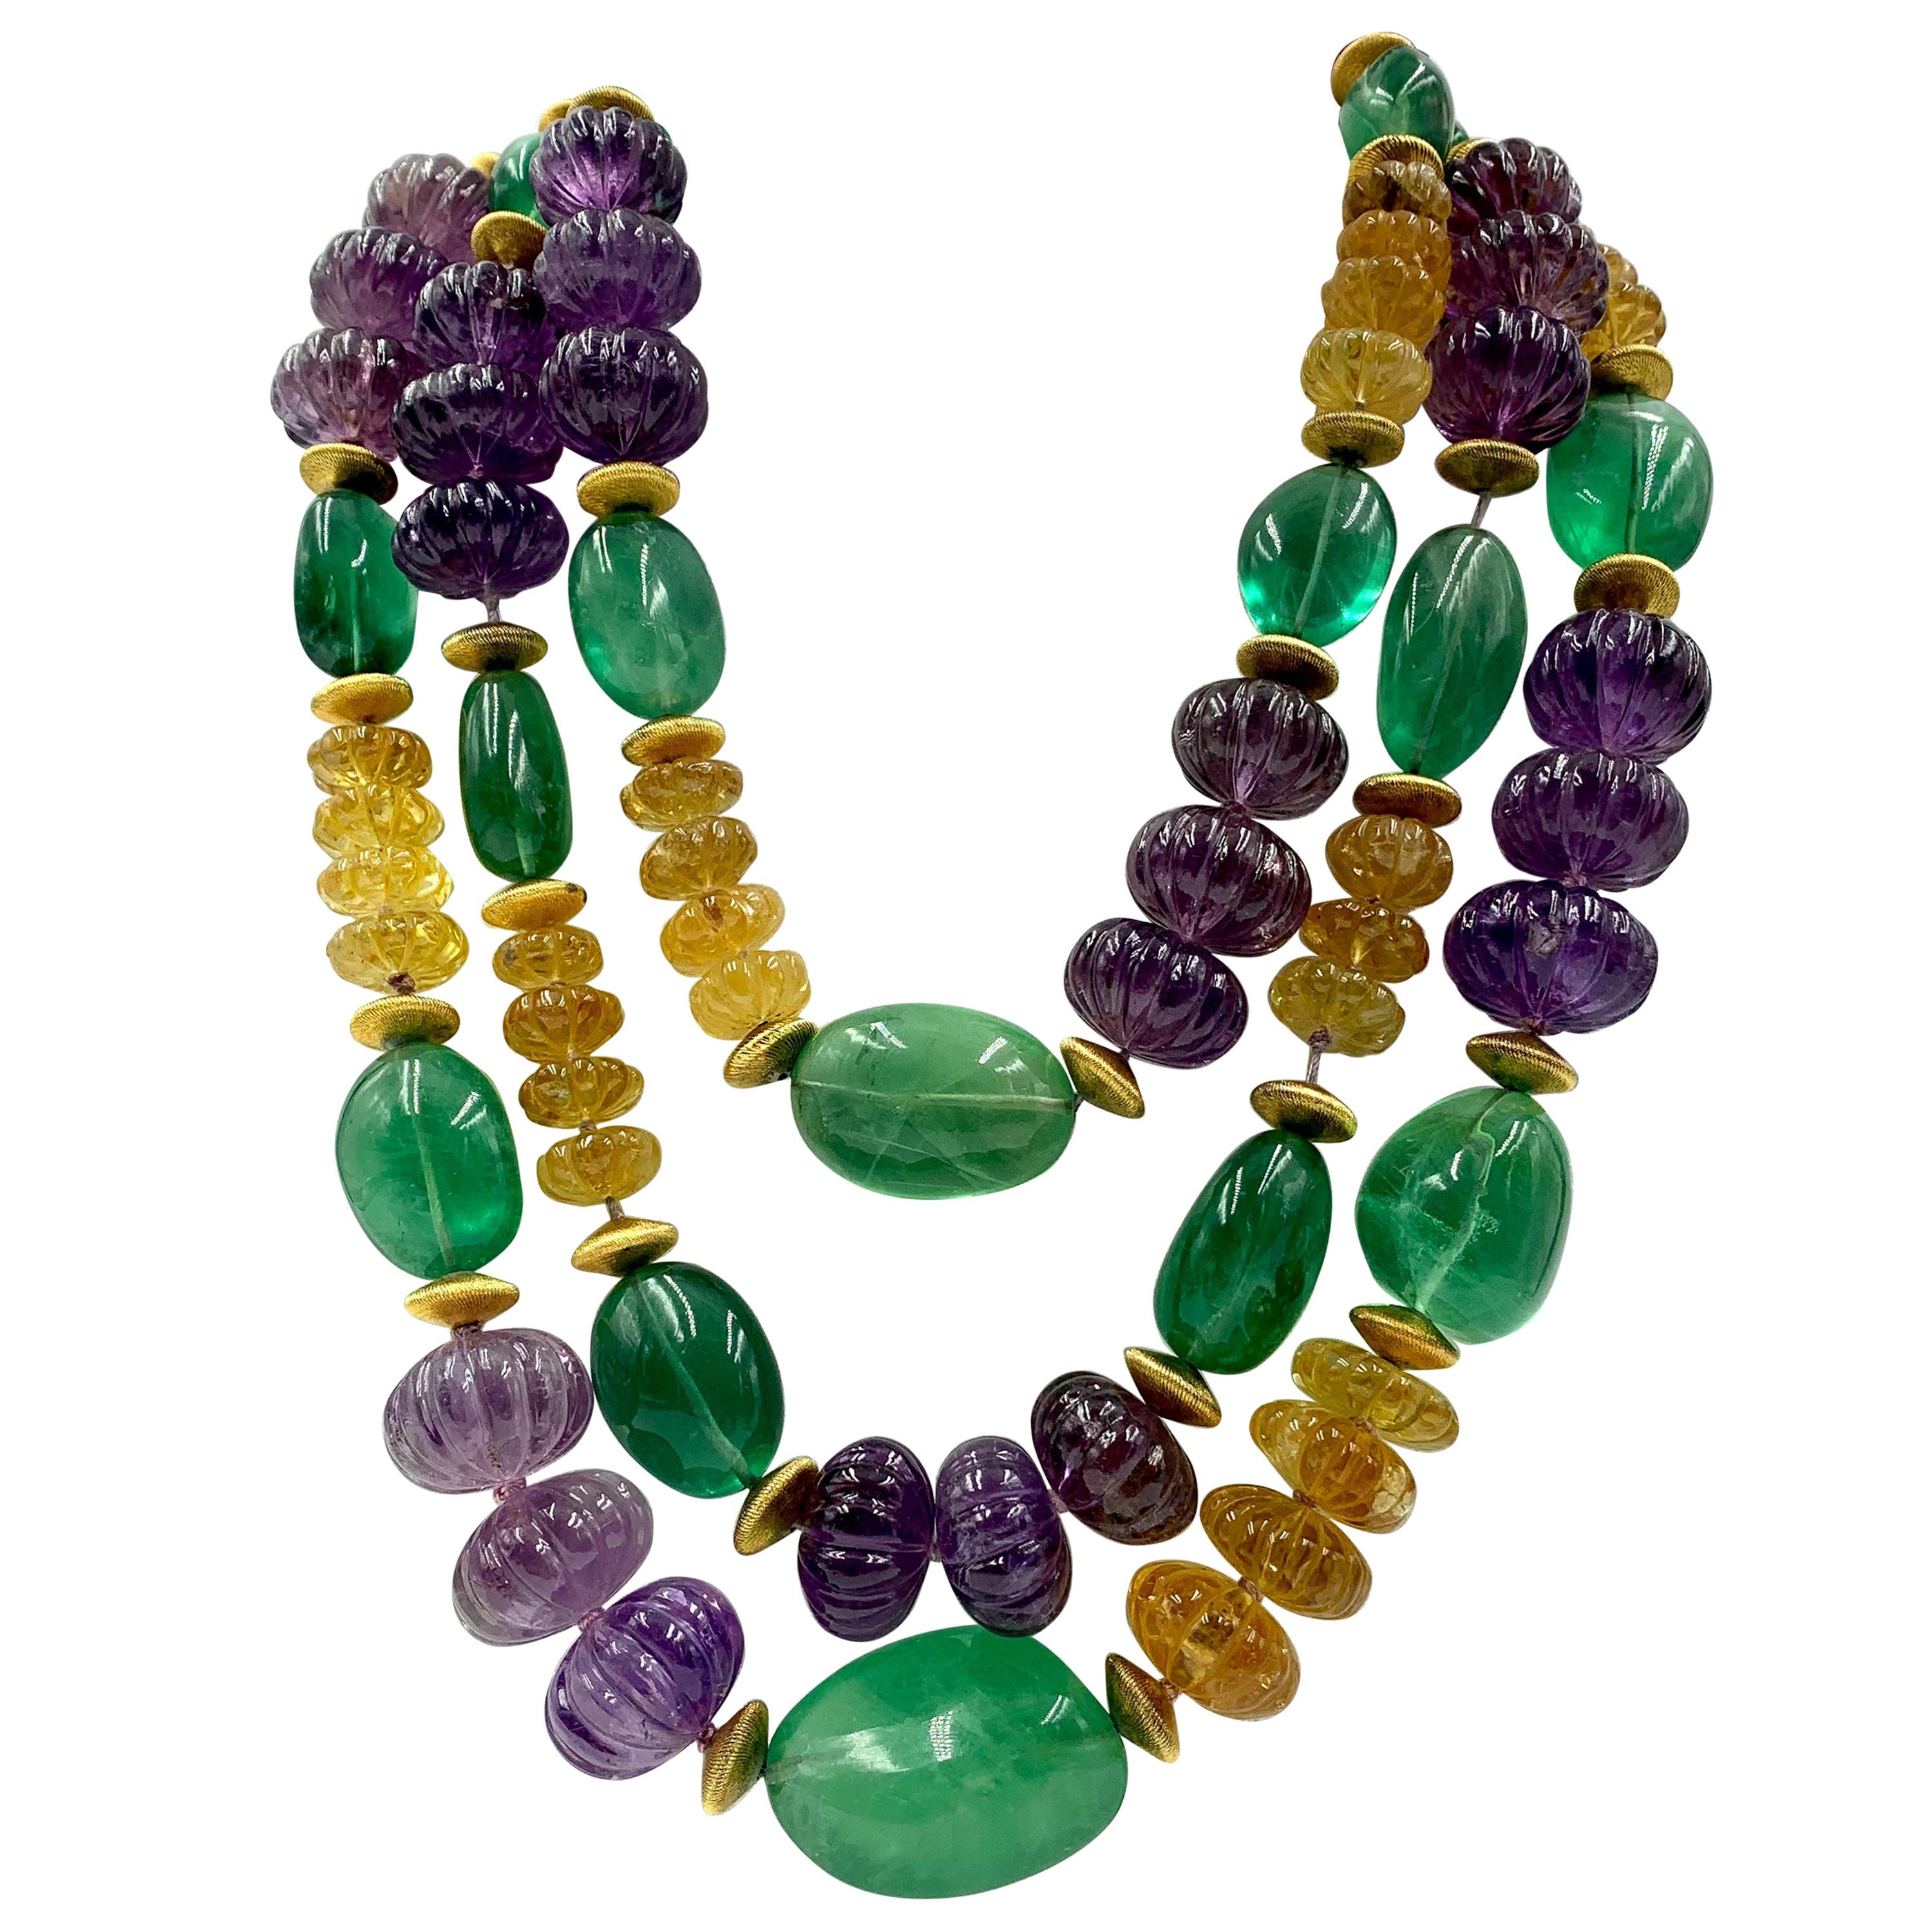 Vintage Iradj Moini Amethyst, Citrine, Fluorite and Gold-Plated Bead Necklace